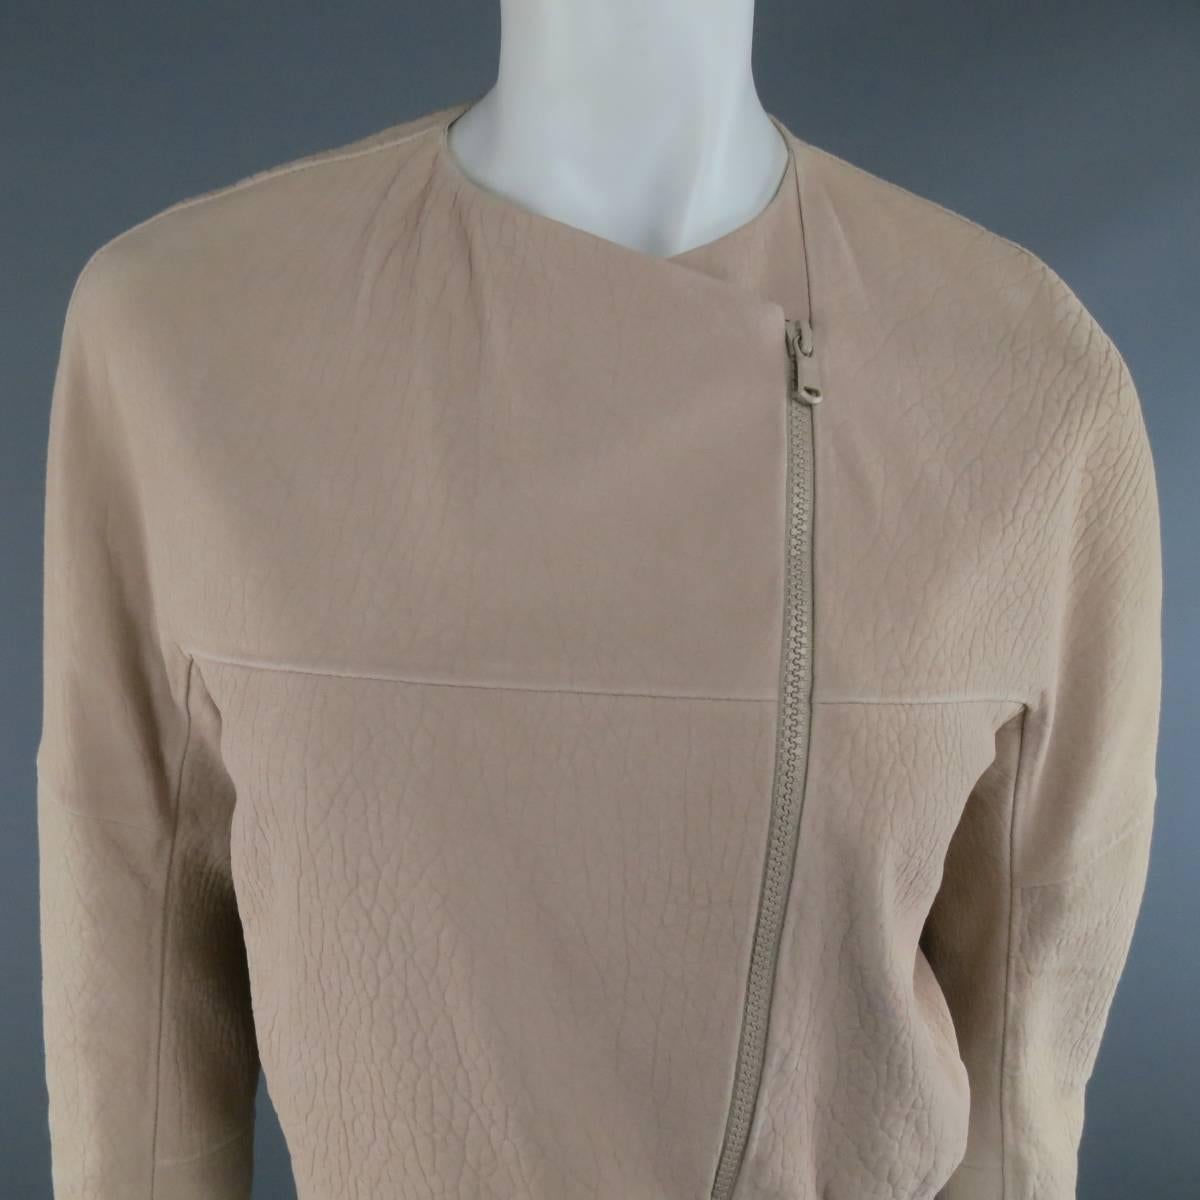 BRUNELLO CUCINELLI moto jacket comes in a muted rose pink wrinkle textured leather and featuring a collarless neckline, tonal asymmetrical double zip closure, and silk lining. Imperfection on back. Made in Italy.
 
Good Pre-Owned Condition.
Marked: